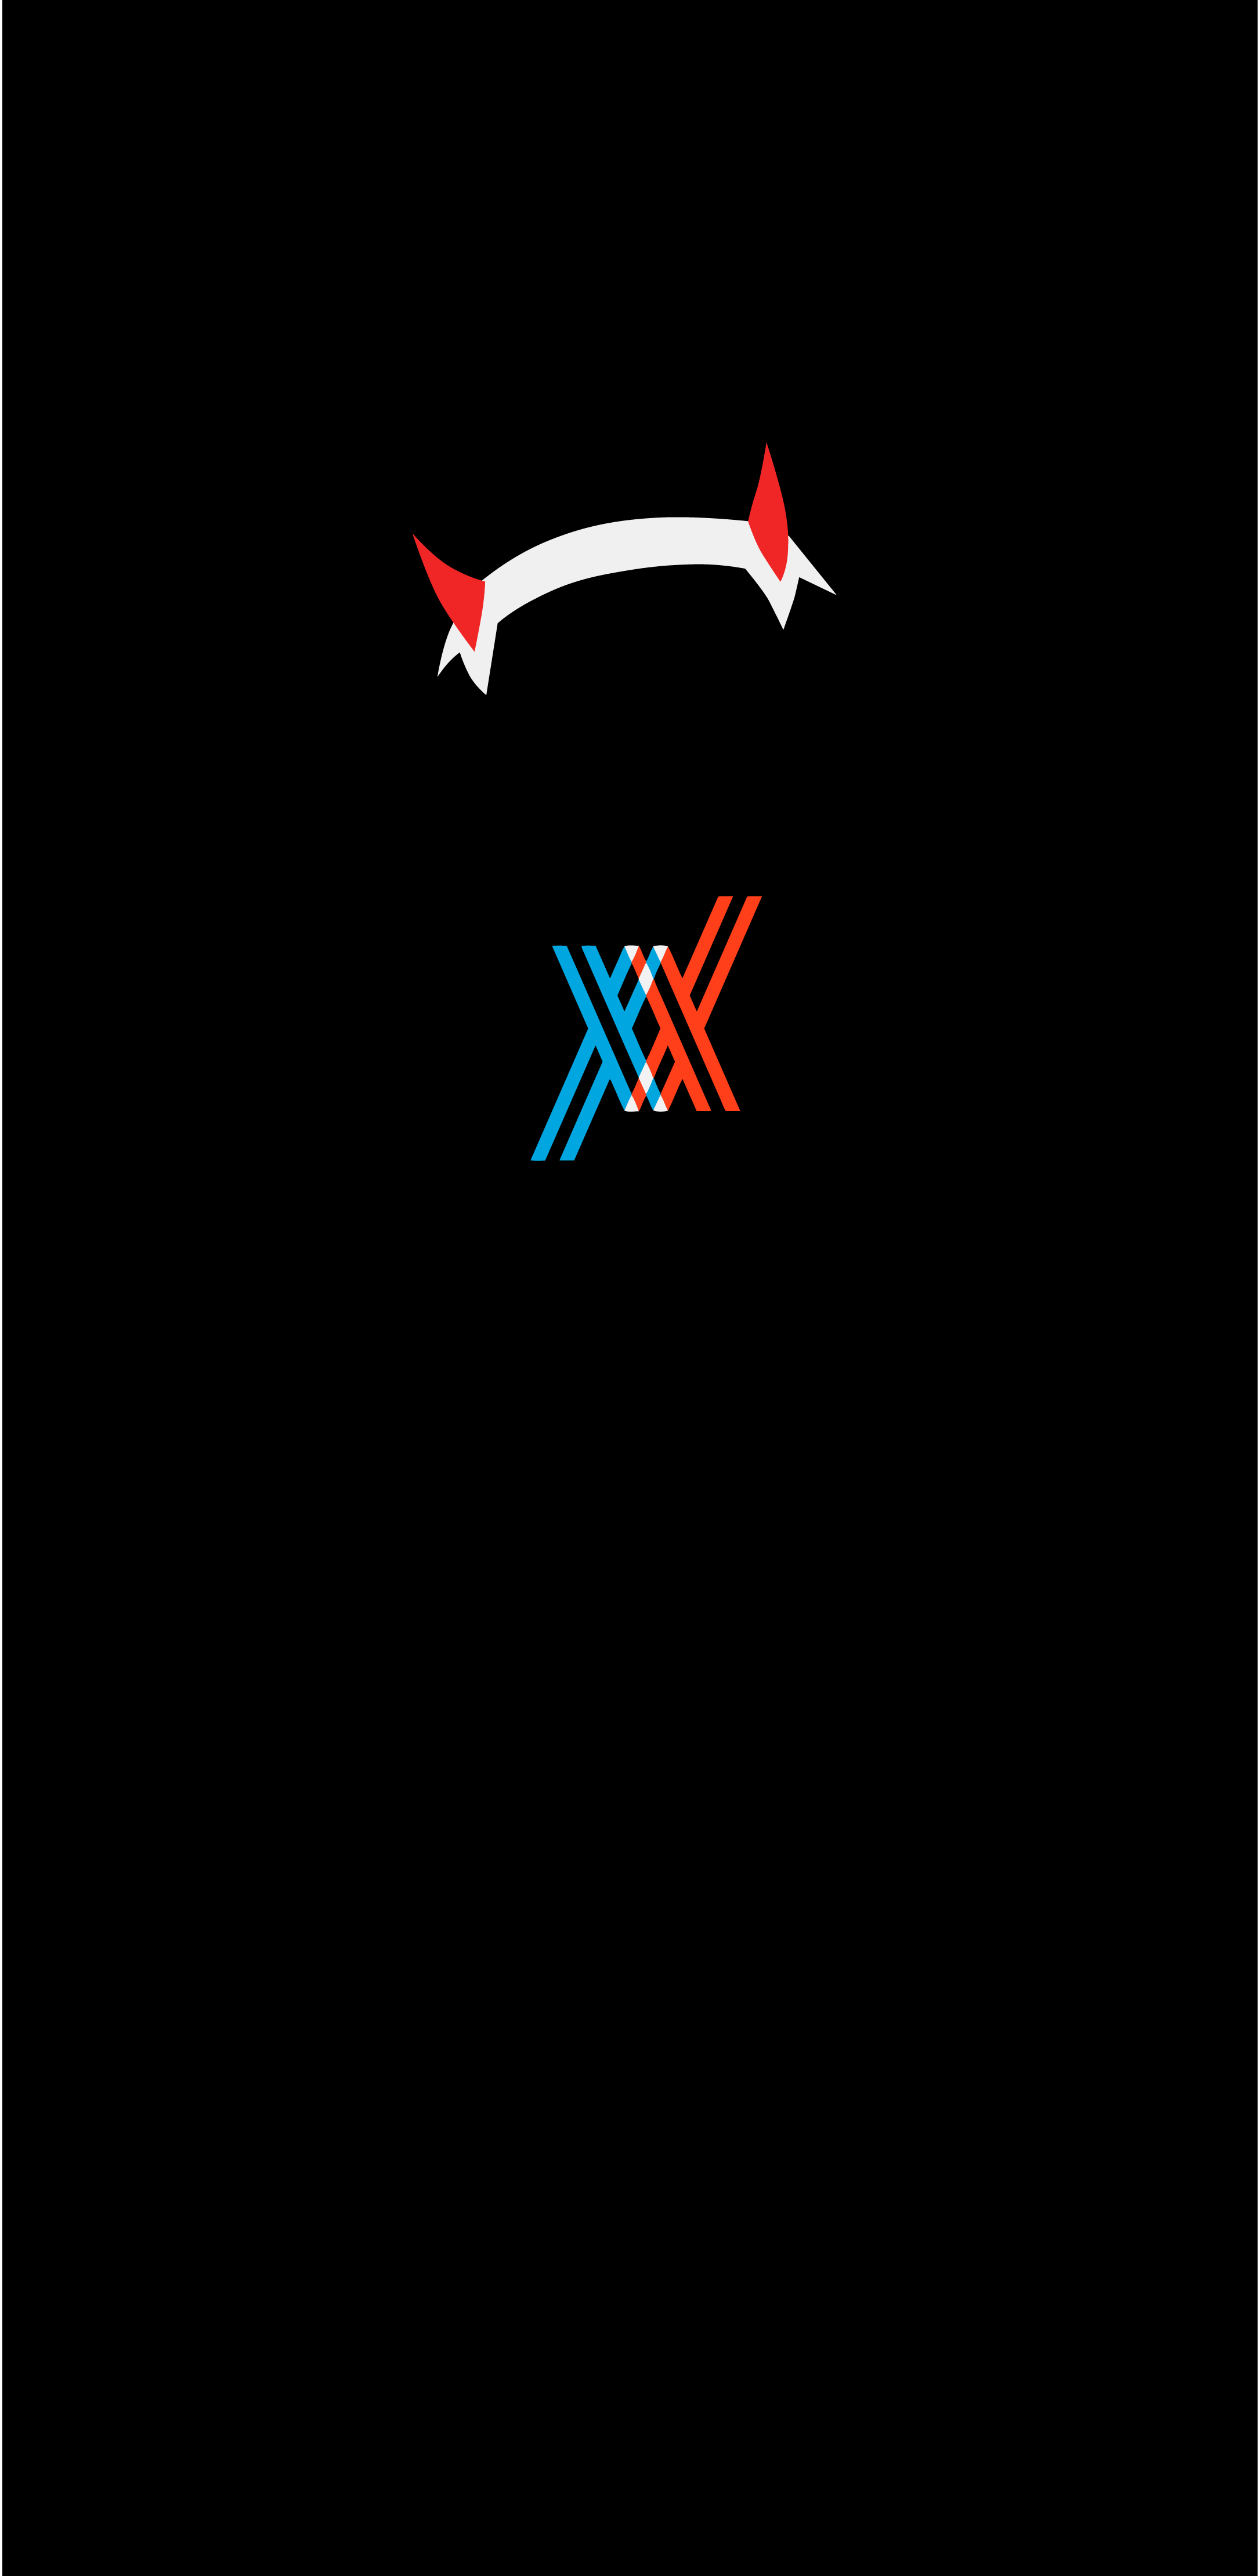 Made this minimalist AMOLED wallpaper, thought you guys would like